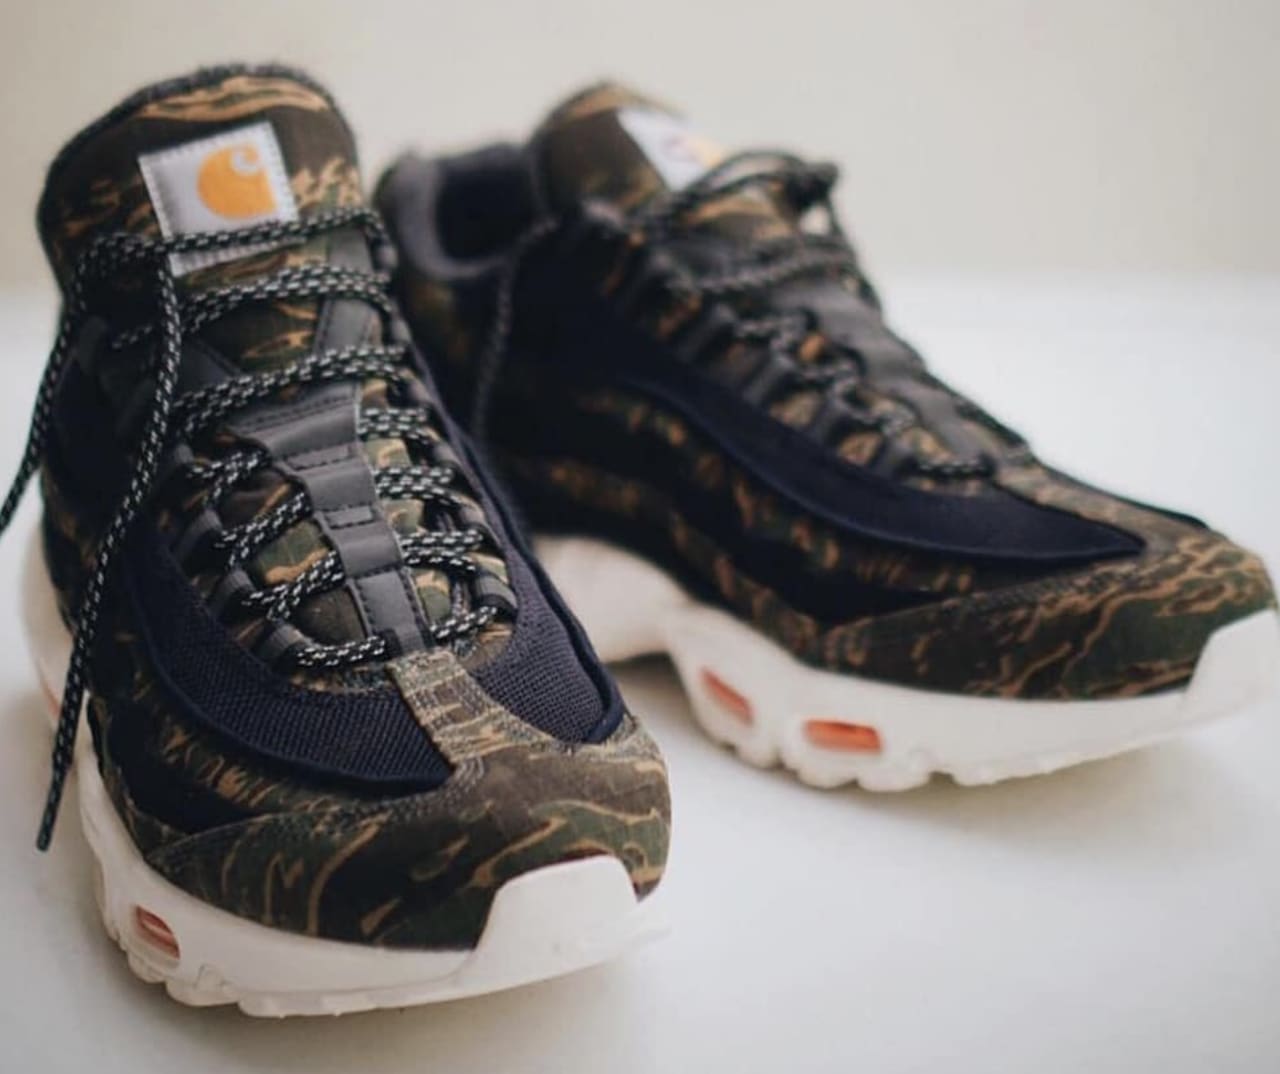 Carhartt x Nike Air Max Collaboration Release Date | Sole Collector